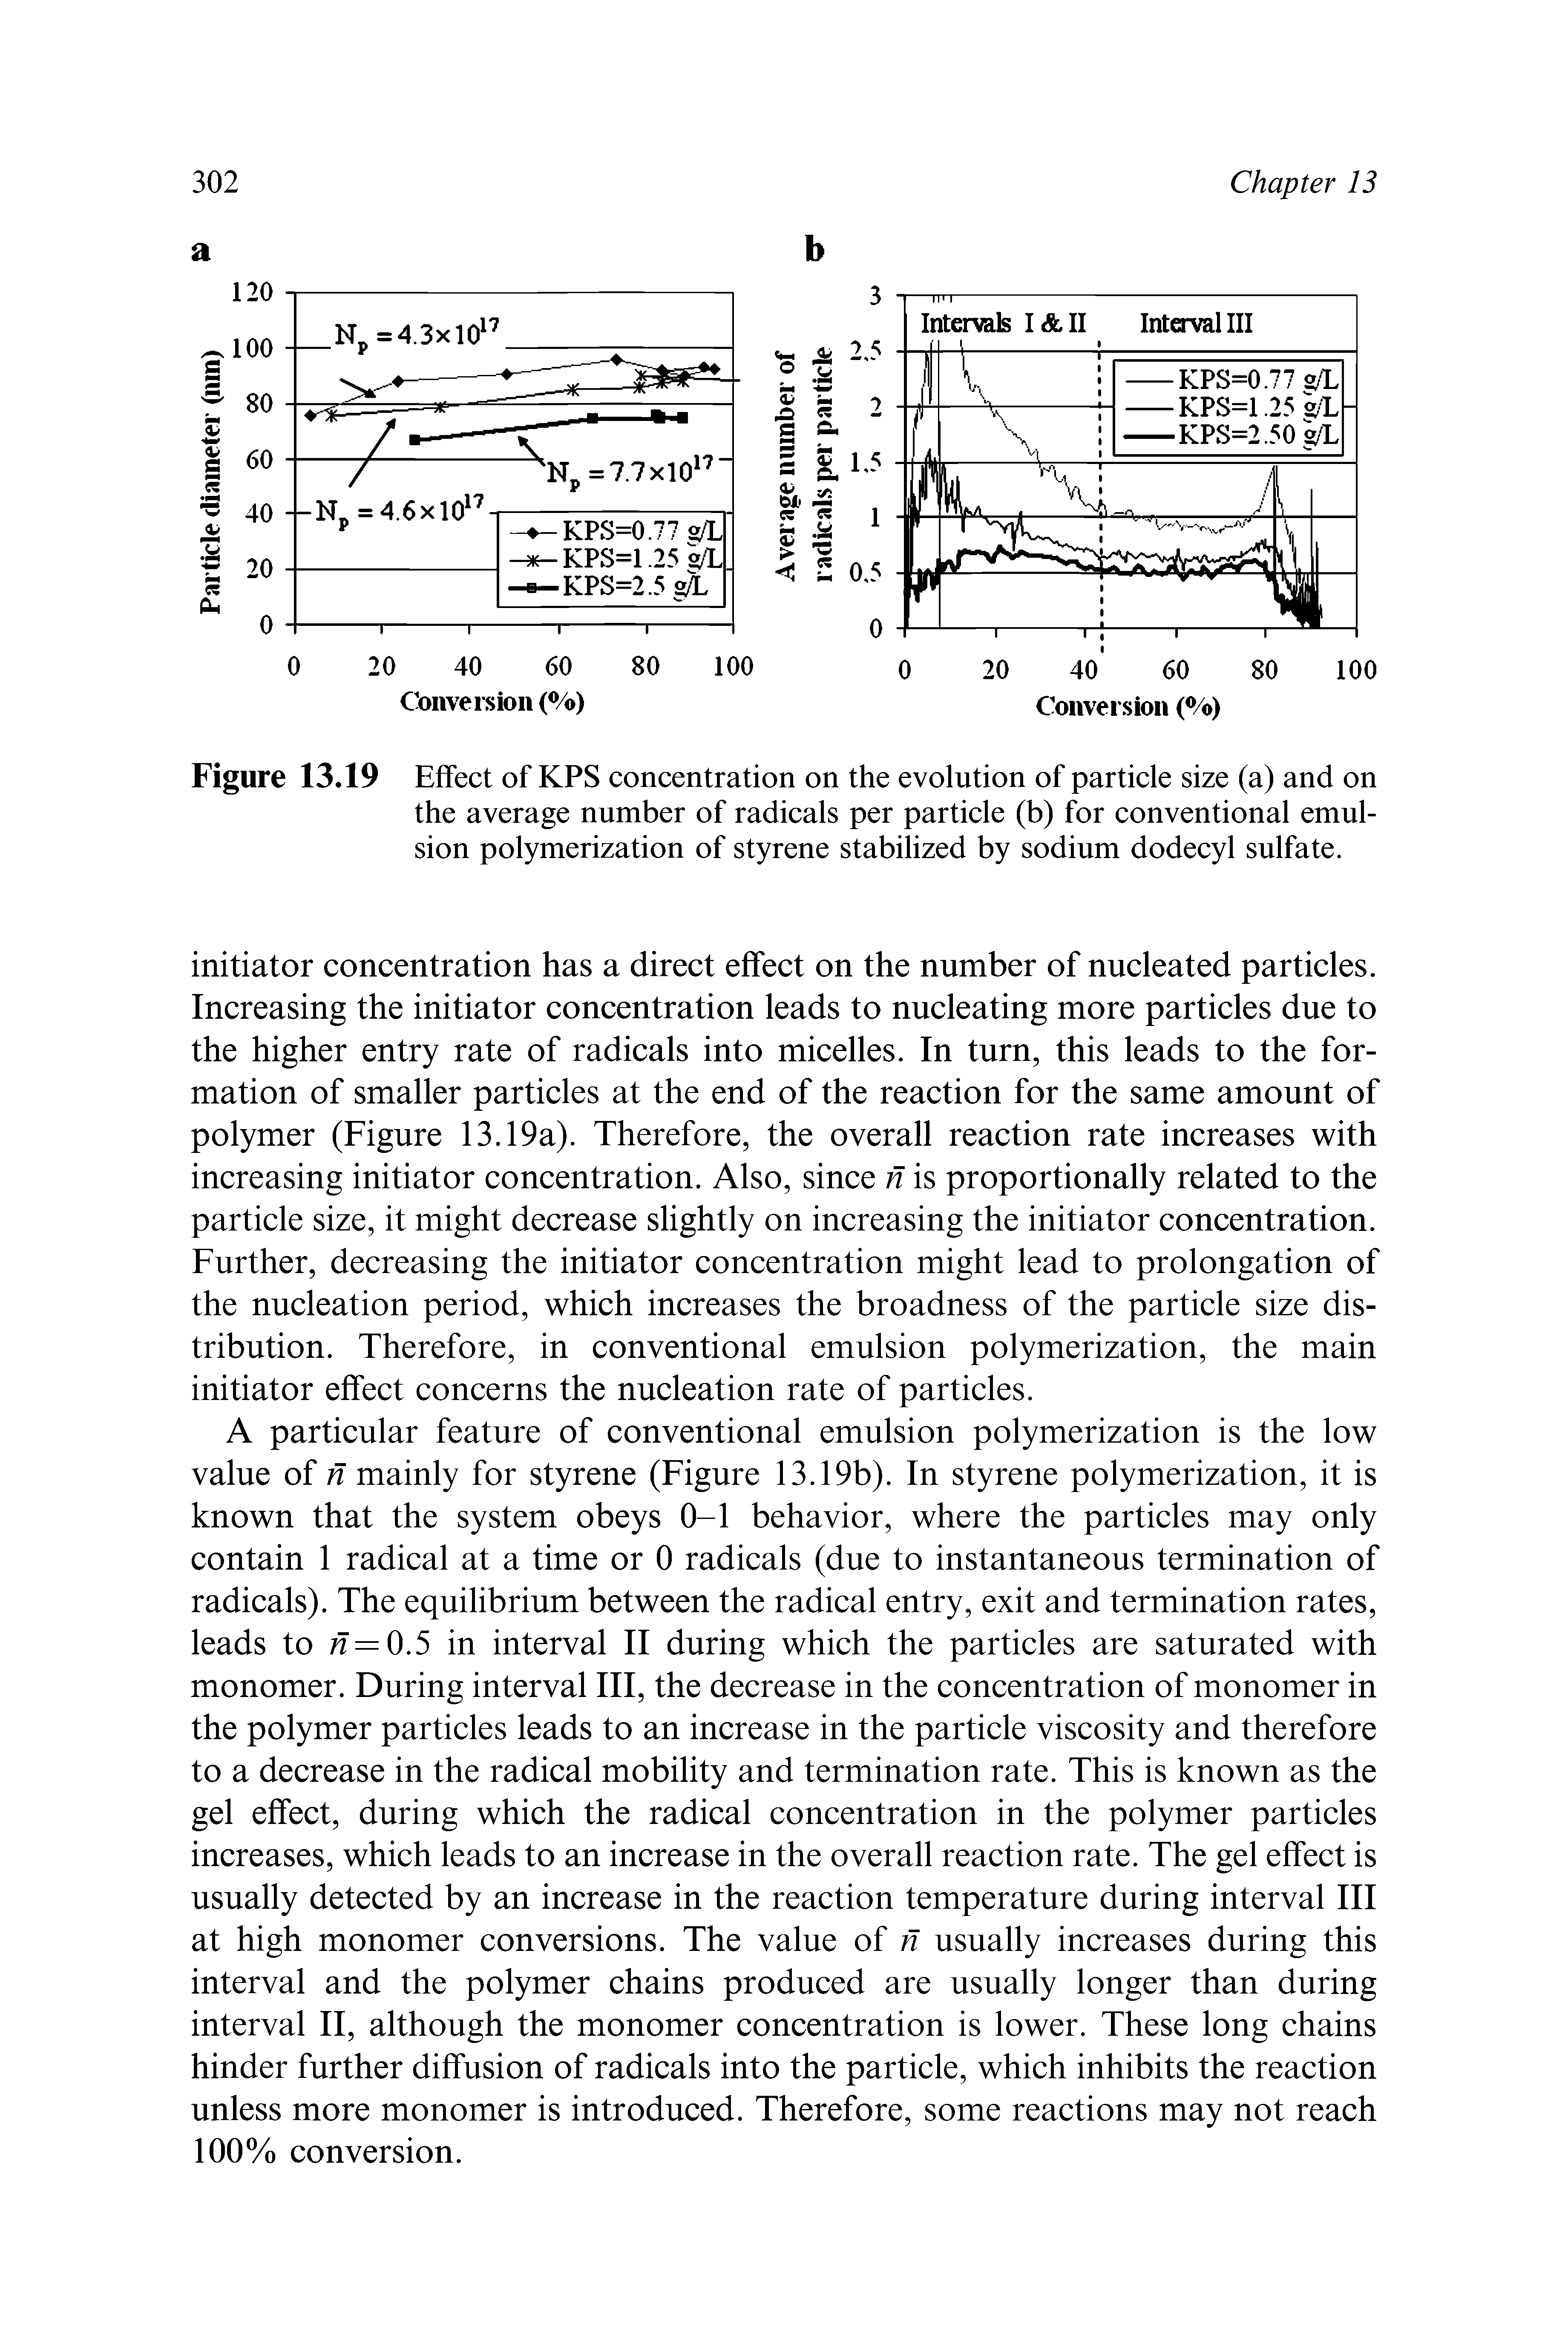 Figure 13.19 Effect of KPS concentration on the evolution of particle size (a) and on the average number of radicals per particle (b) for conventional emulsion polymerization of styrene stabilized by sodium dodecyl sulfate.